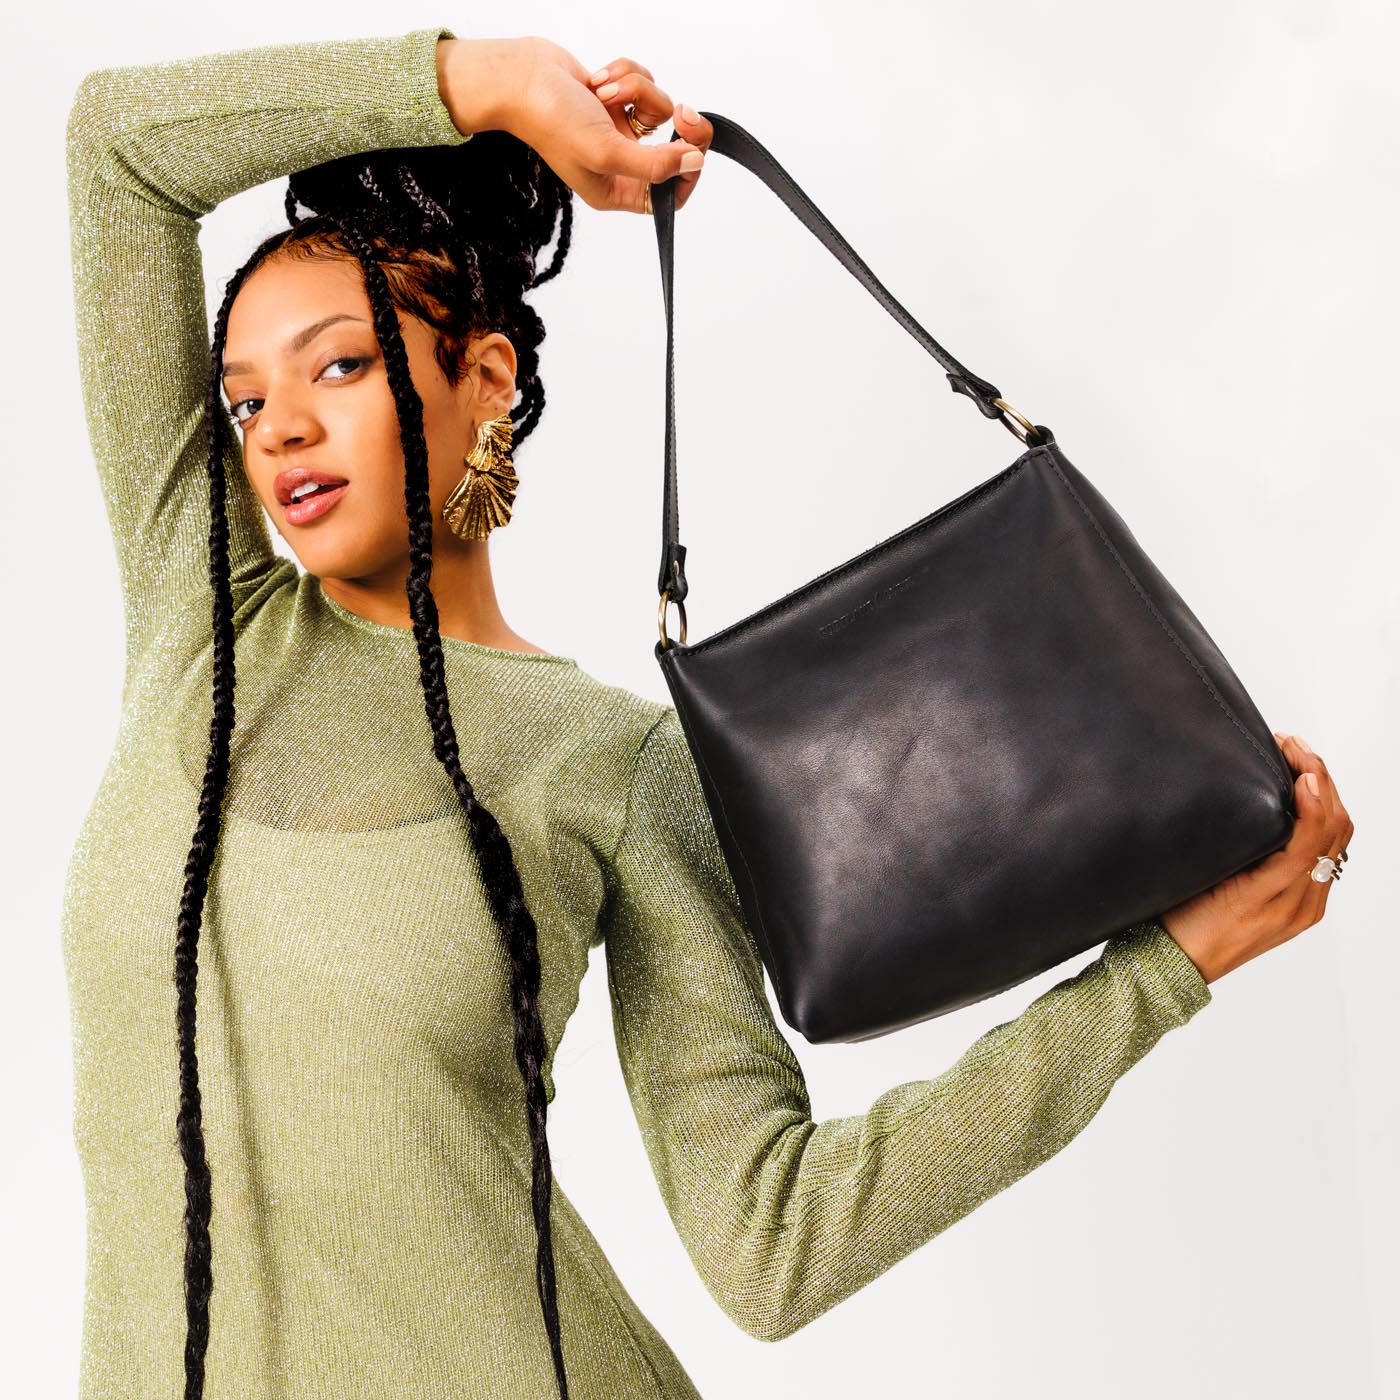 Women's Leather Shoulder Bags & Leather Clutch bags